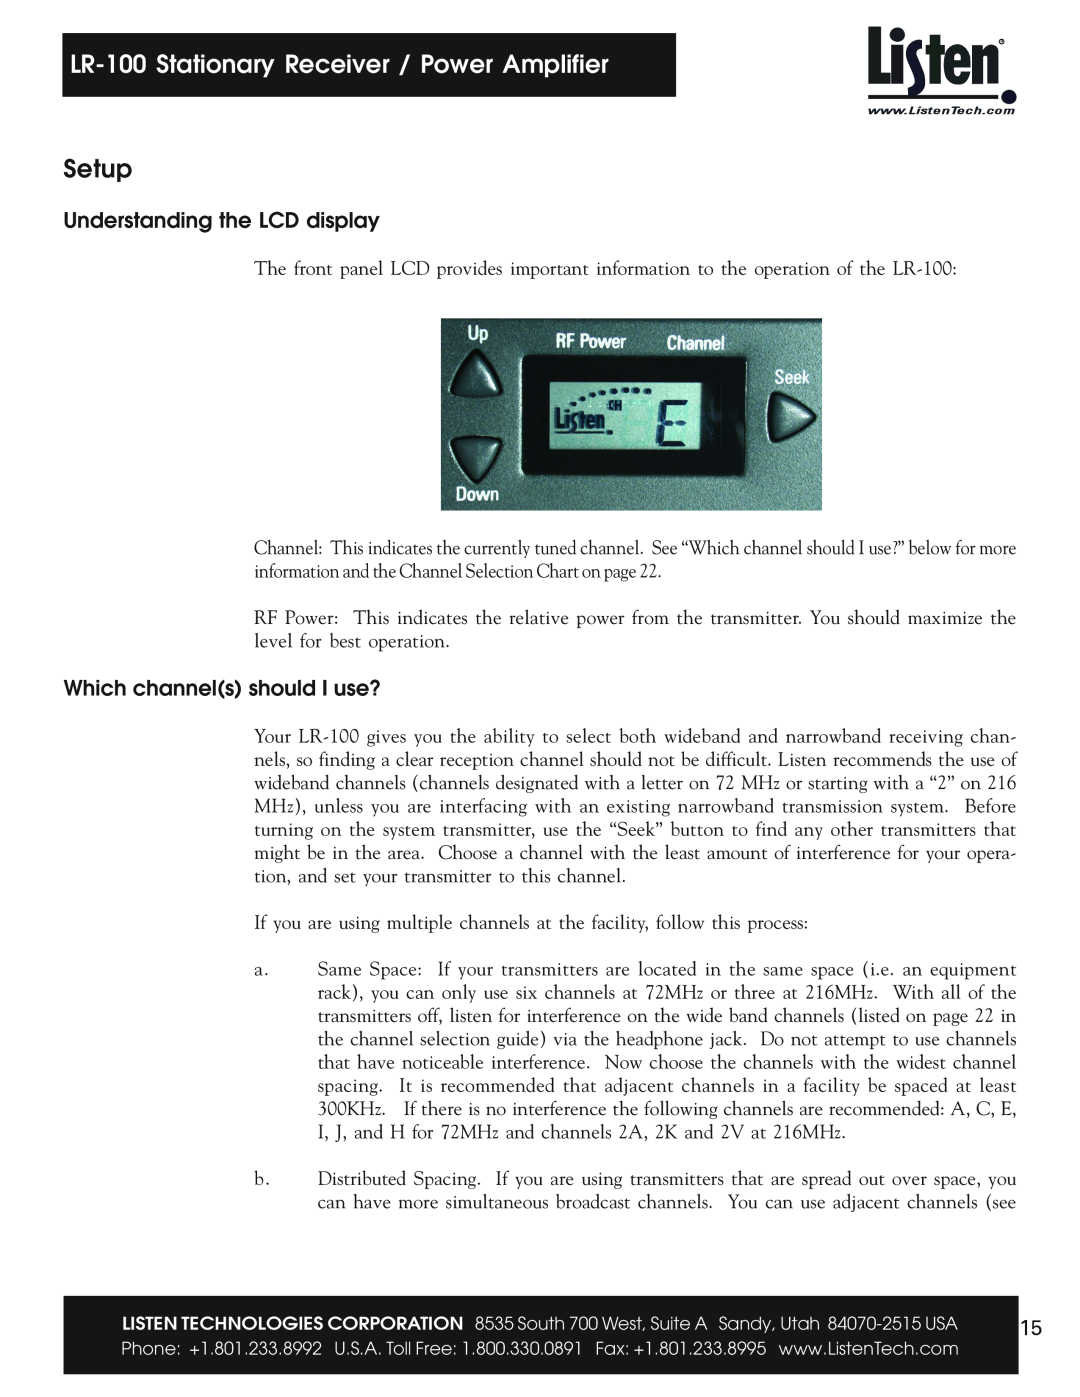 Listen Technologies LR-100 user manual Setup, Understanding the LCD display, Which channels should I use? 